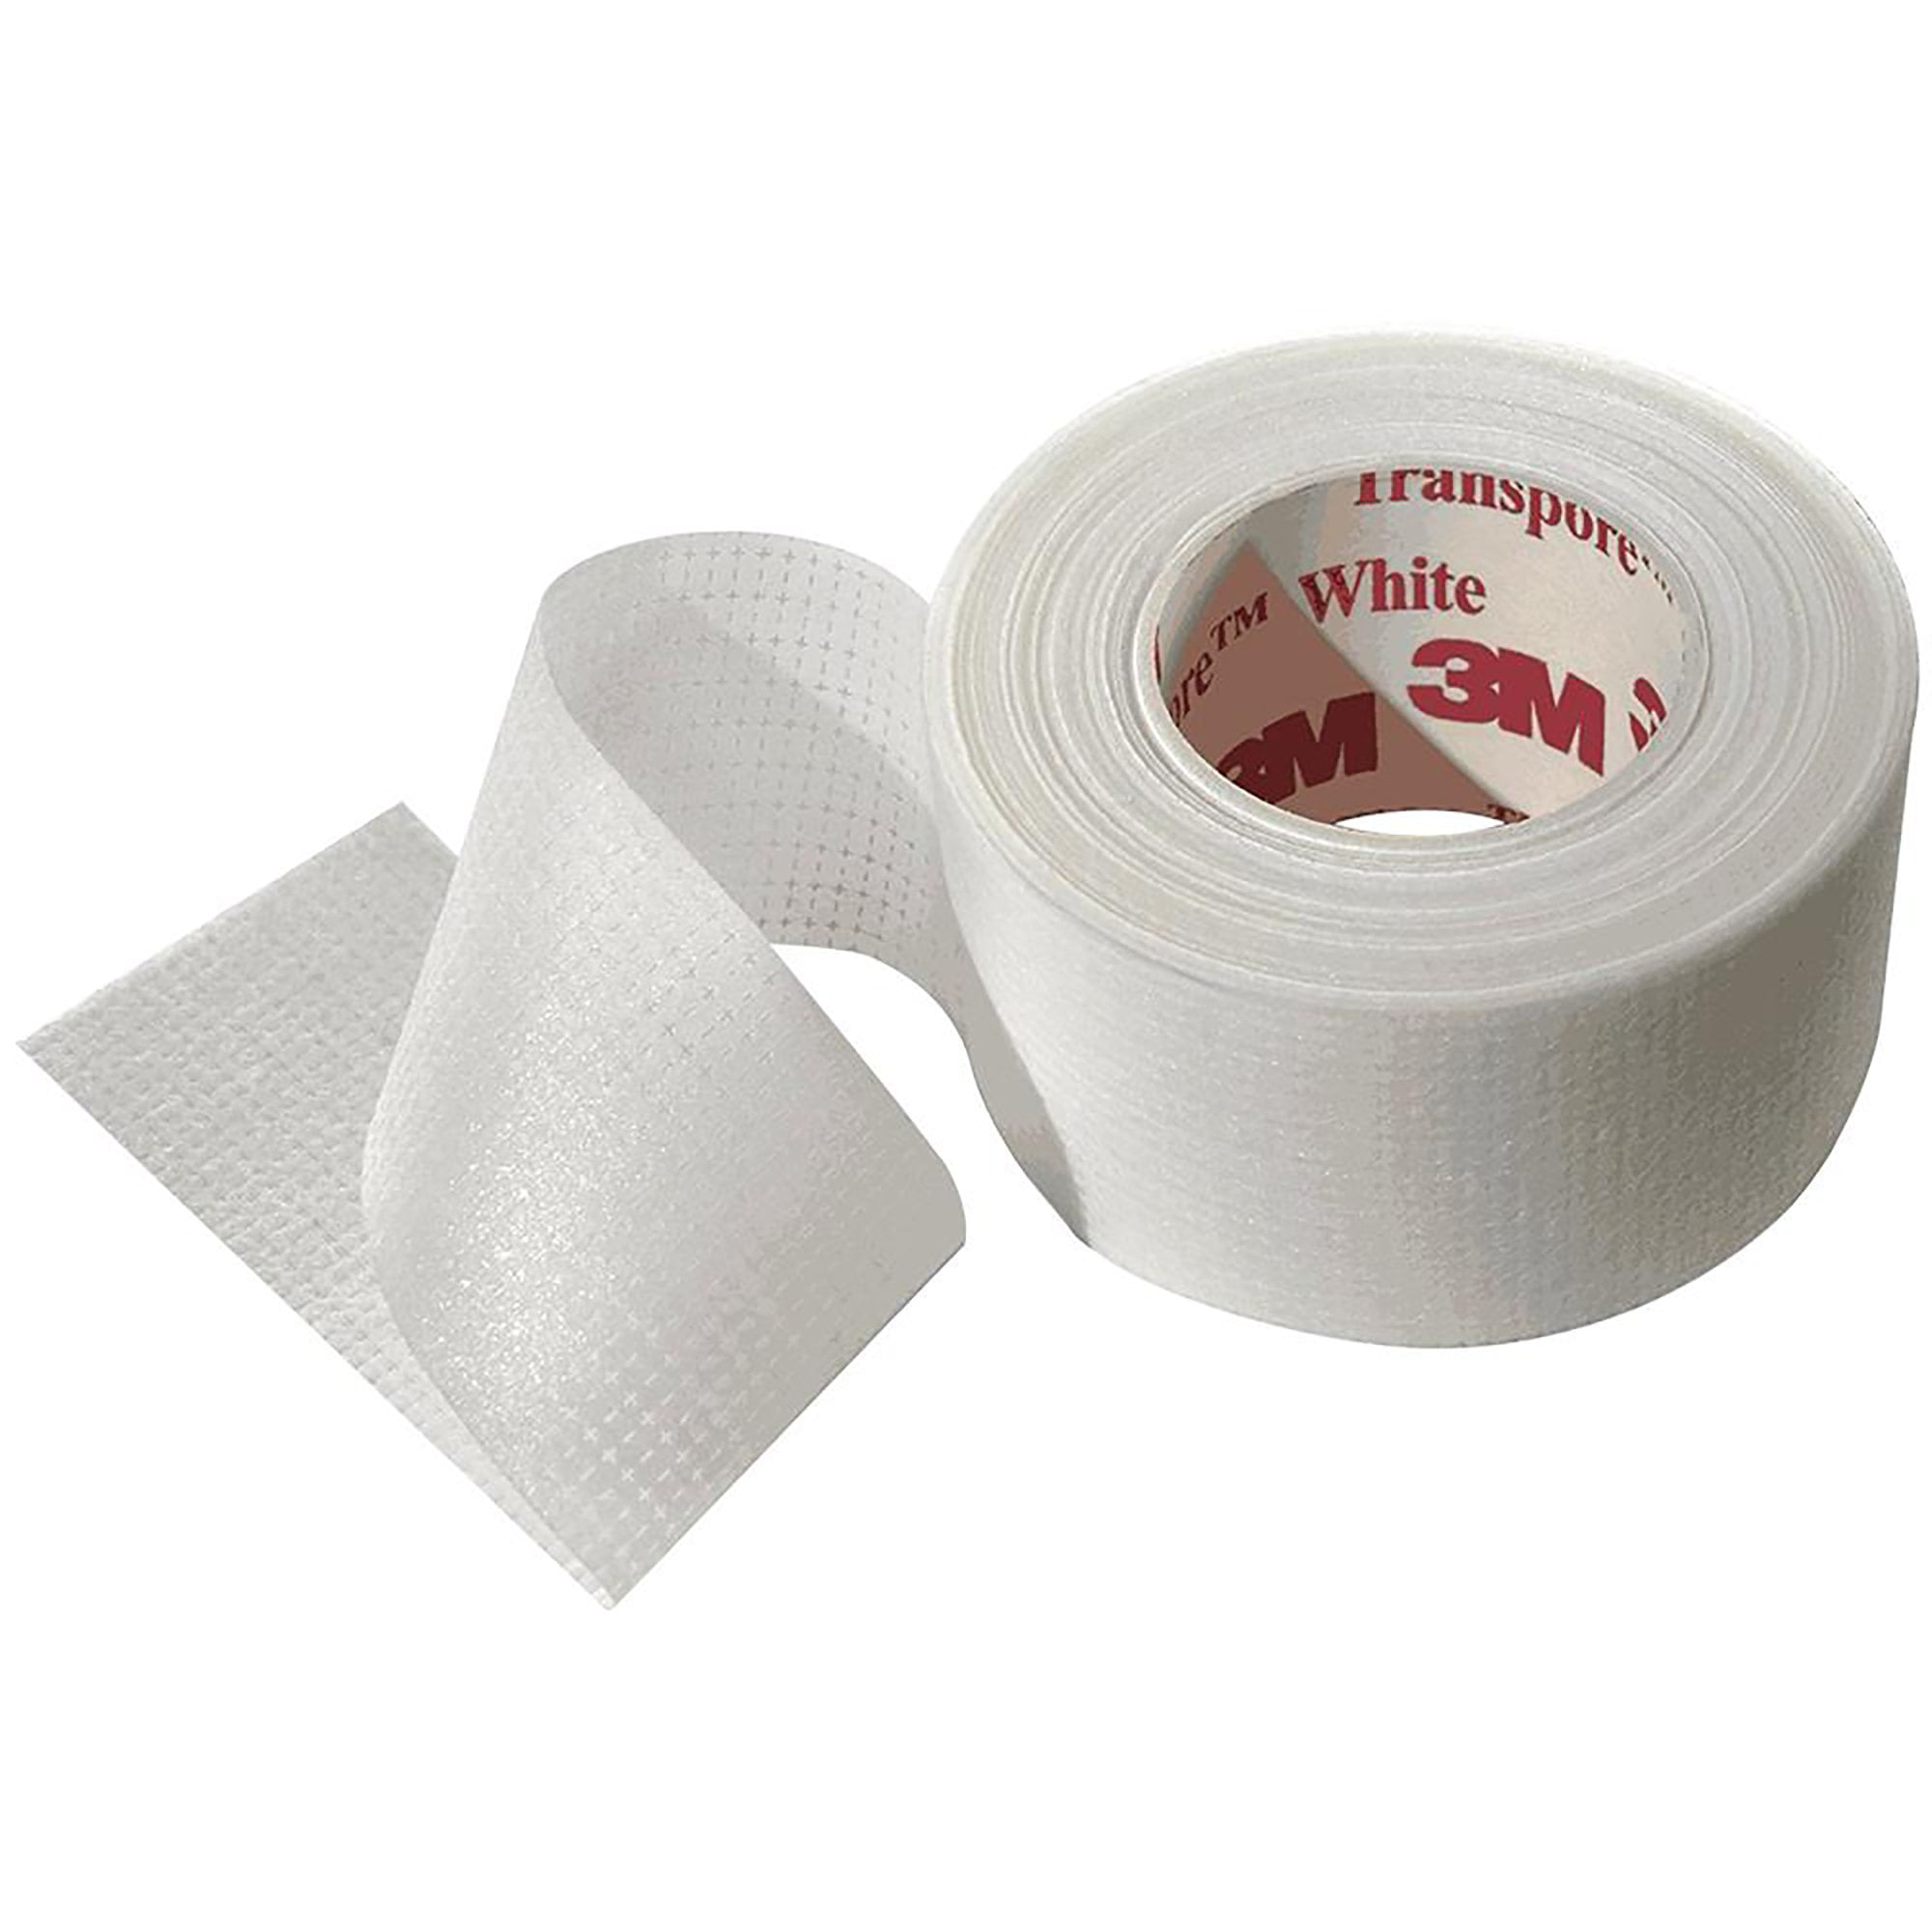 3M Transpore Clear Surgical Tape 1 x 10 yards Roll – 1, 2, 4, 6, 12 or 24  rolls – Ovalery SVG